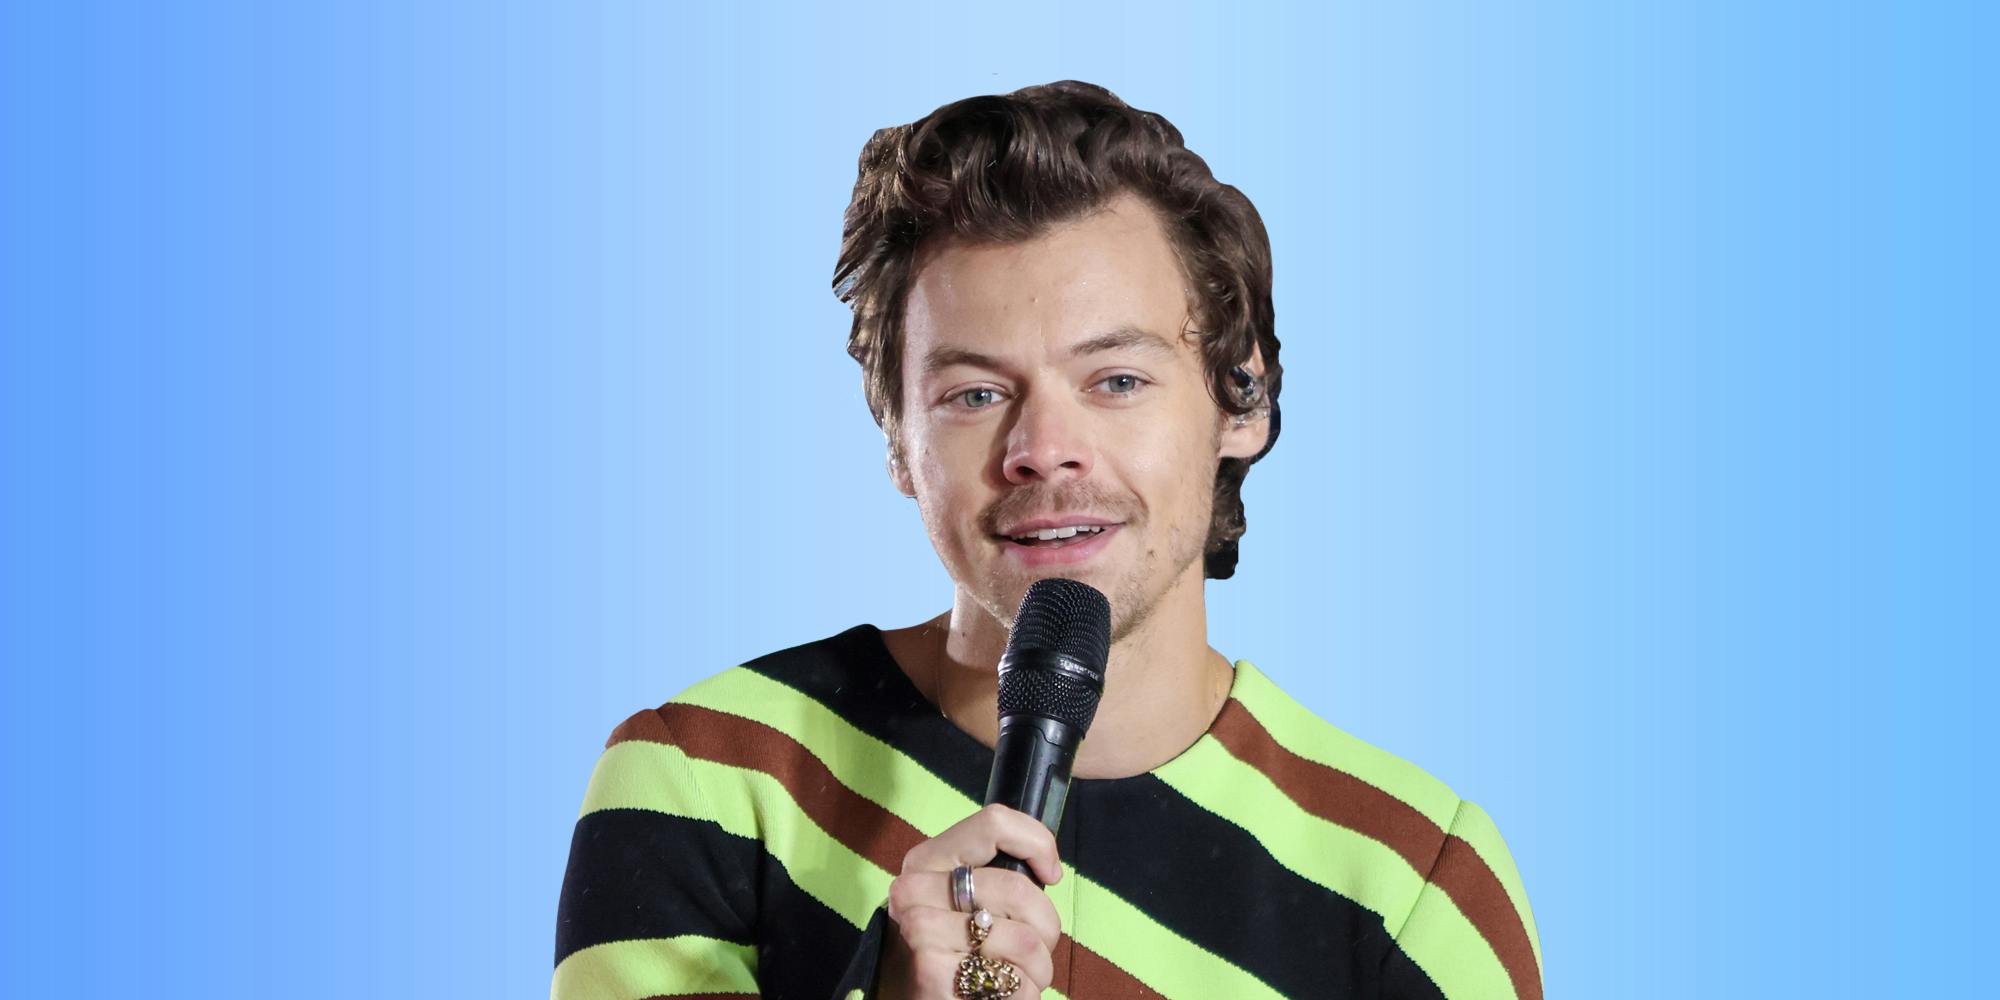 ‘So much of gay sex in film is two guys going at it’: Harry Styles under fire for his comments about gay sex scenes